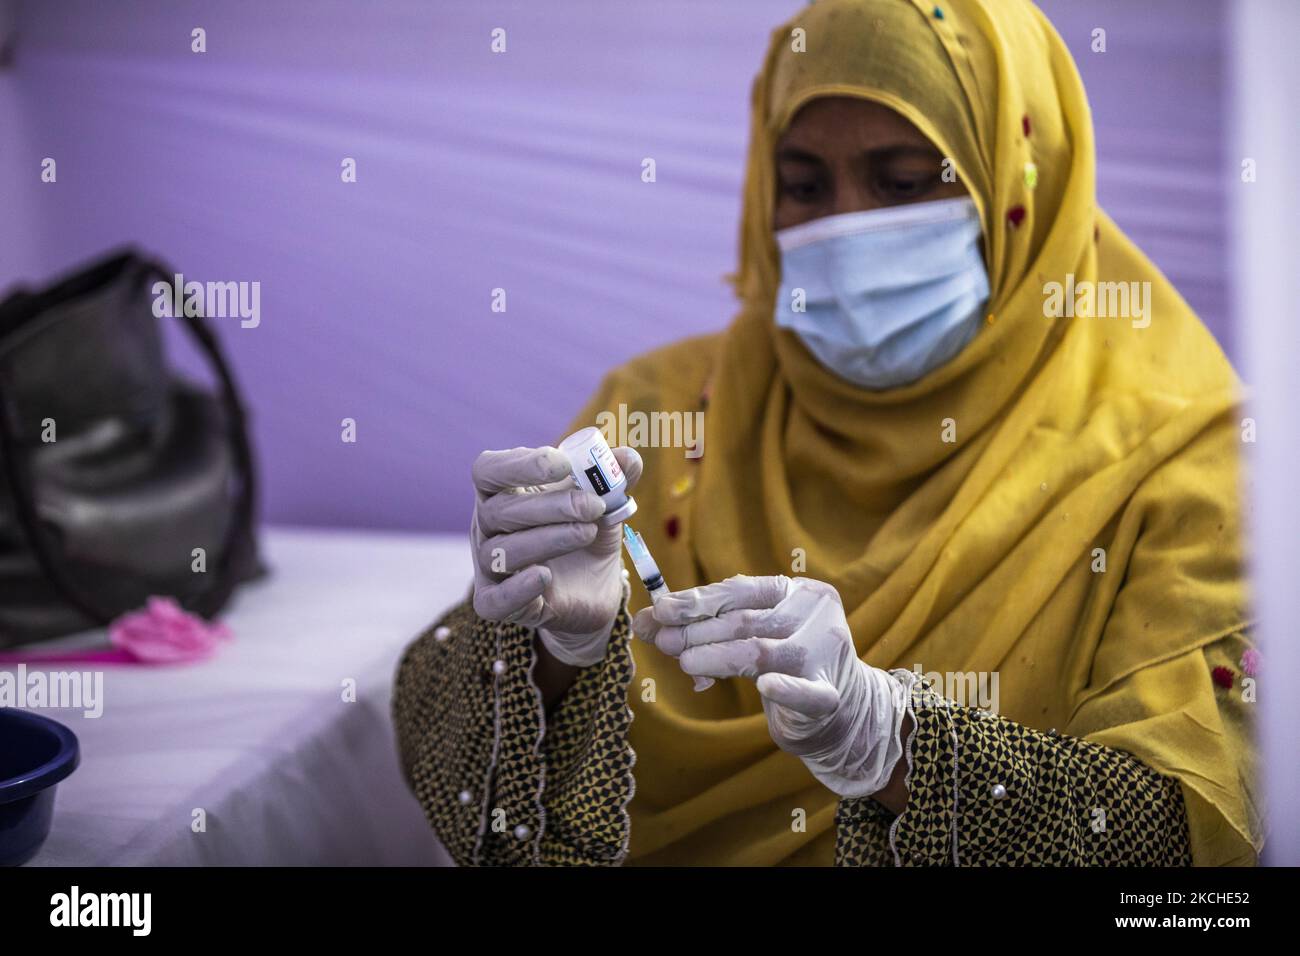 A health worker shows a vial of the Moderna vaccine against the Covid-19 coronavirus in Gazipur, about 37 km from Dhaka On July 18, 2021. (Photo by Ahmed Salahuddin/NurPhoto) Stock Photo